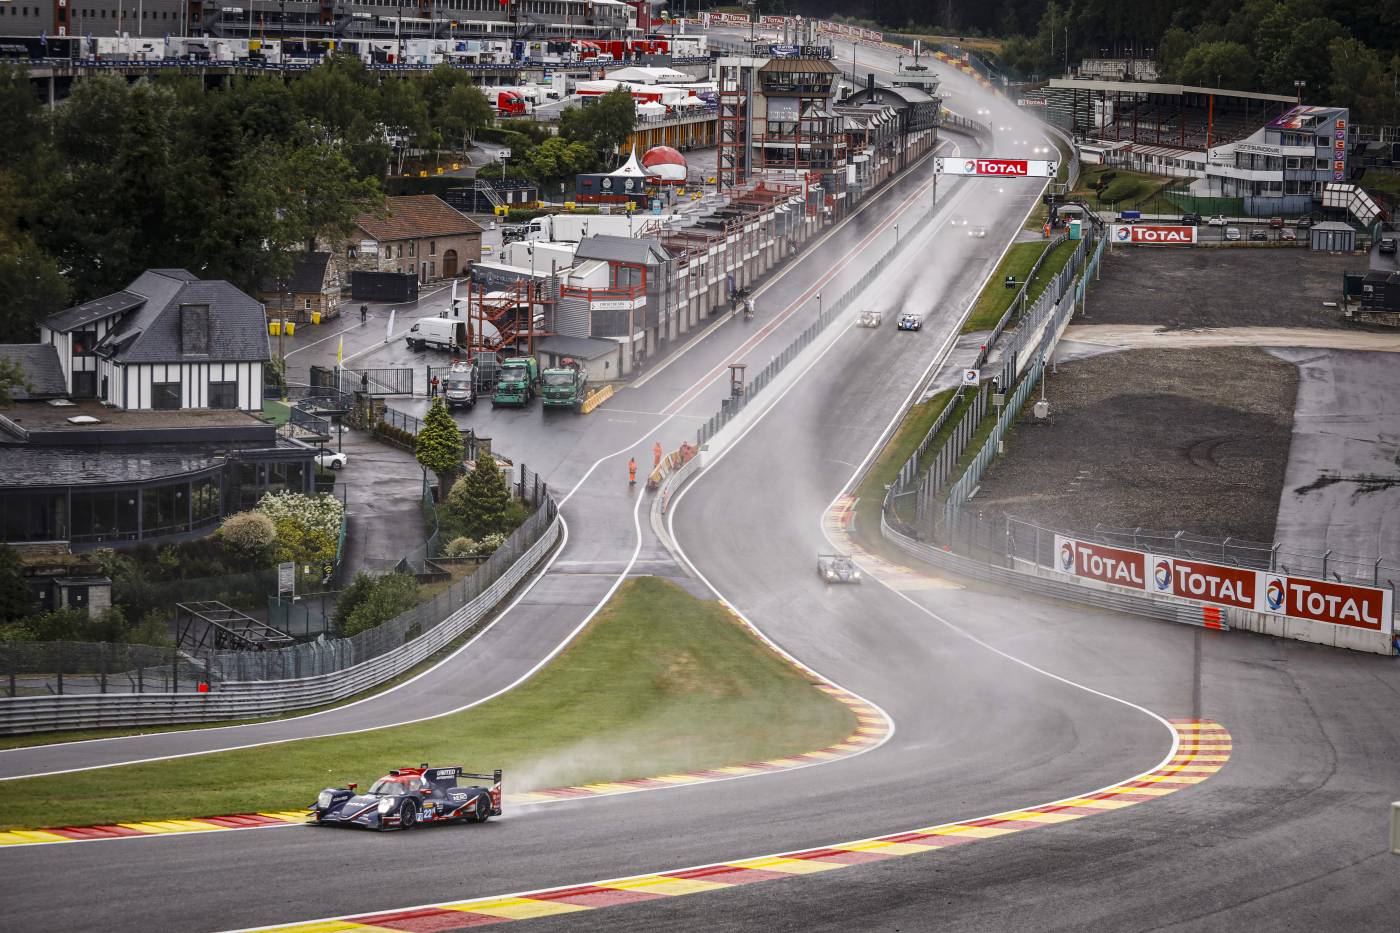 Uncompromising, United Autosports wins the 6 Hours of Spa